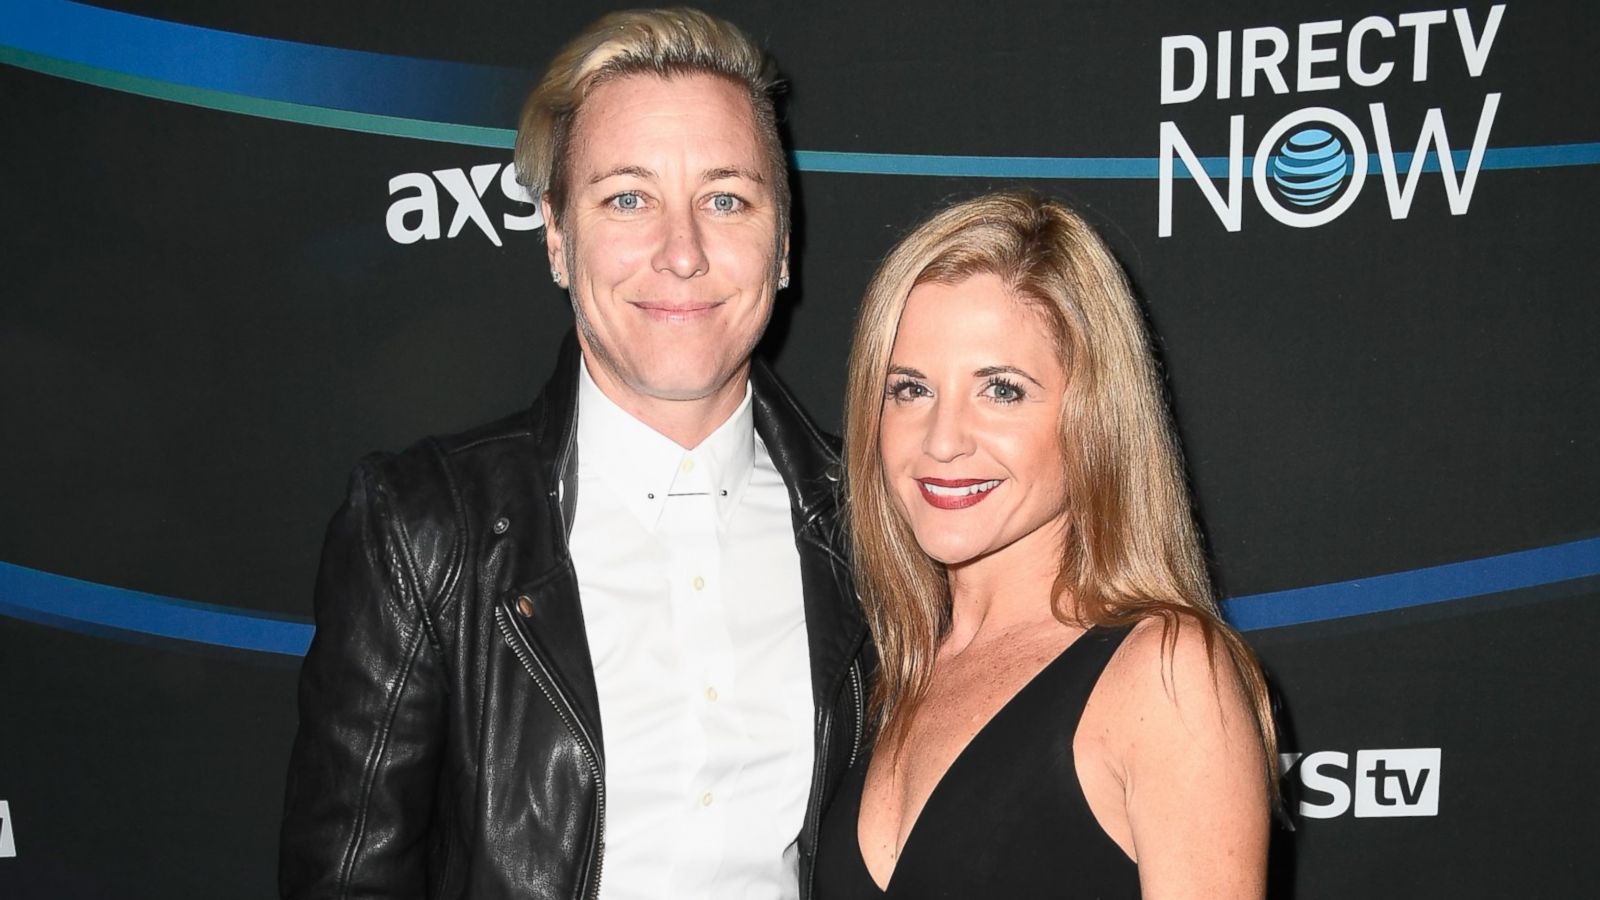 Abby Wambach Still Has to Explain World Cup Games to Wife Glennon Doyle